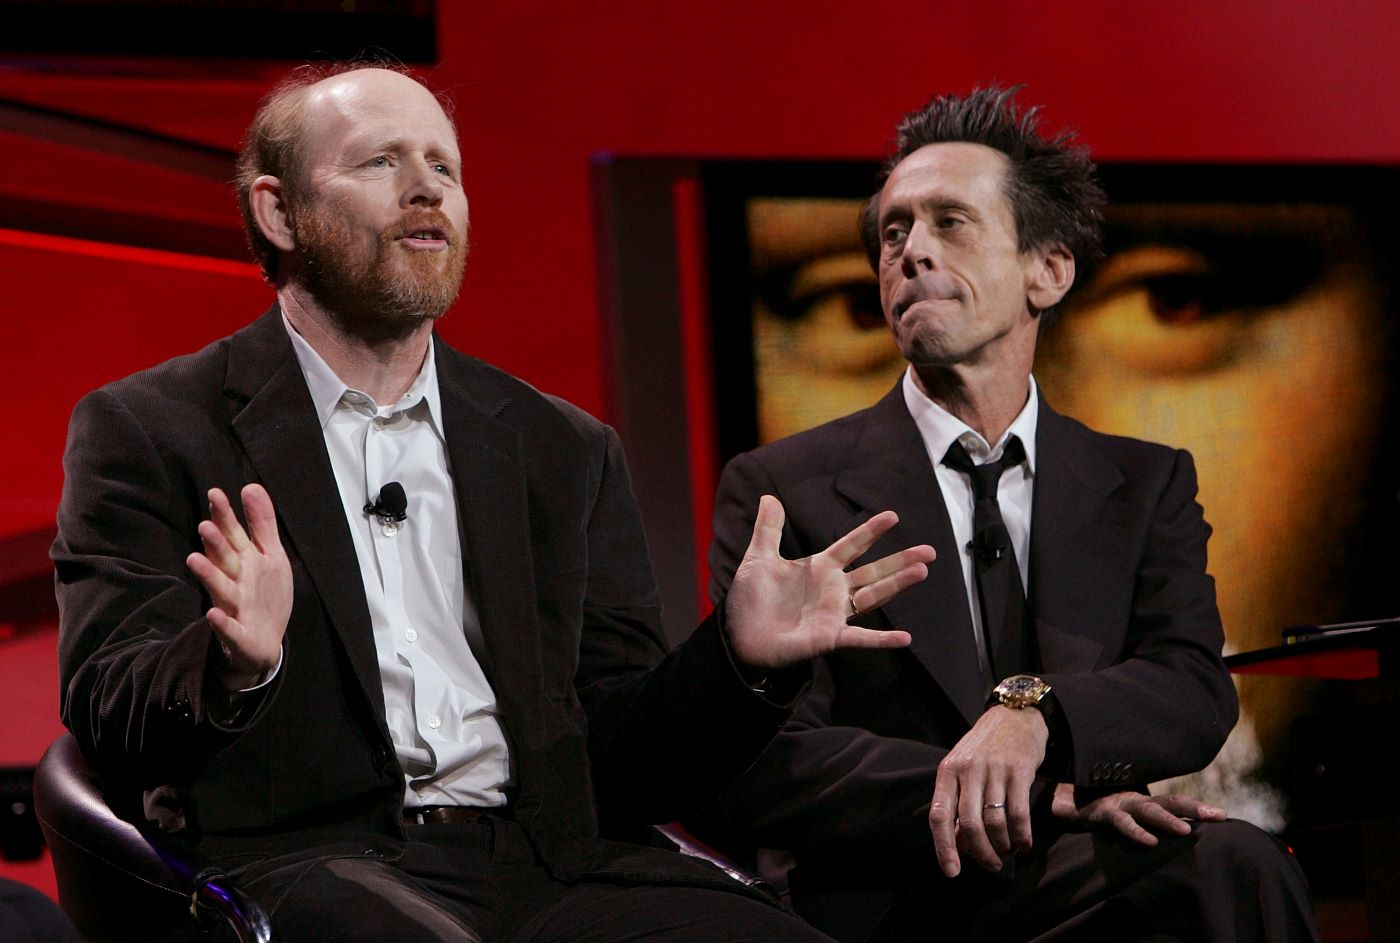 Director Ron Howard and producer Brian Grazer from 'The Davinci Code' wearing suits against a red background.